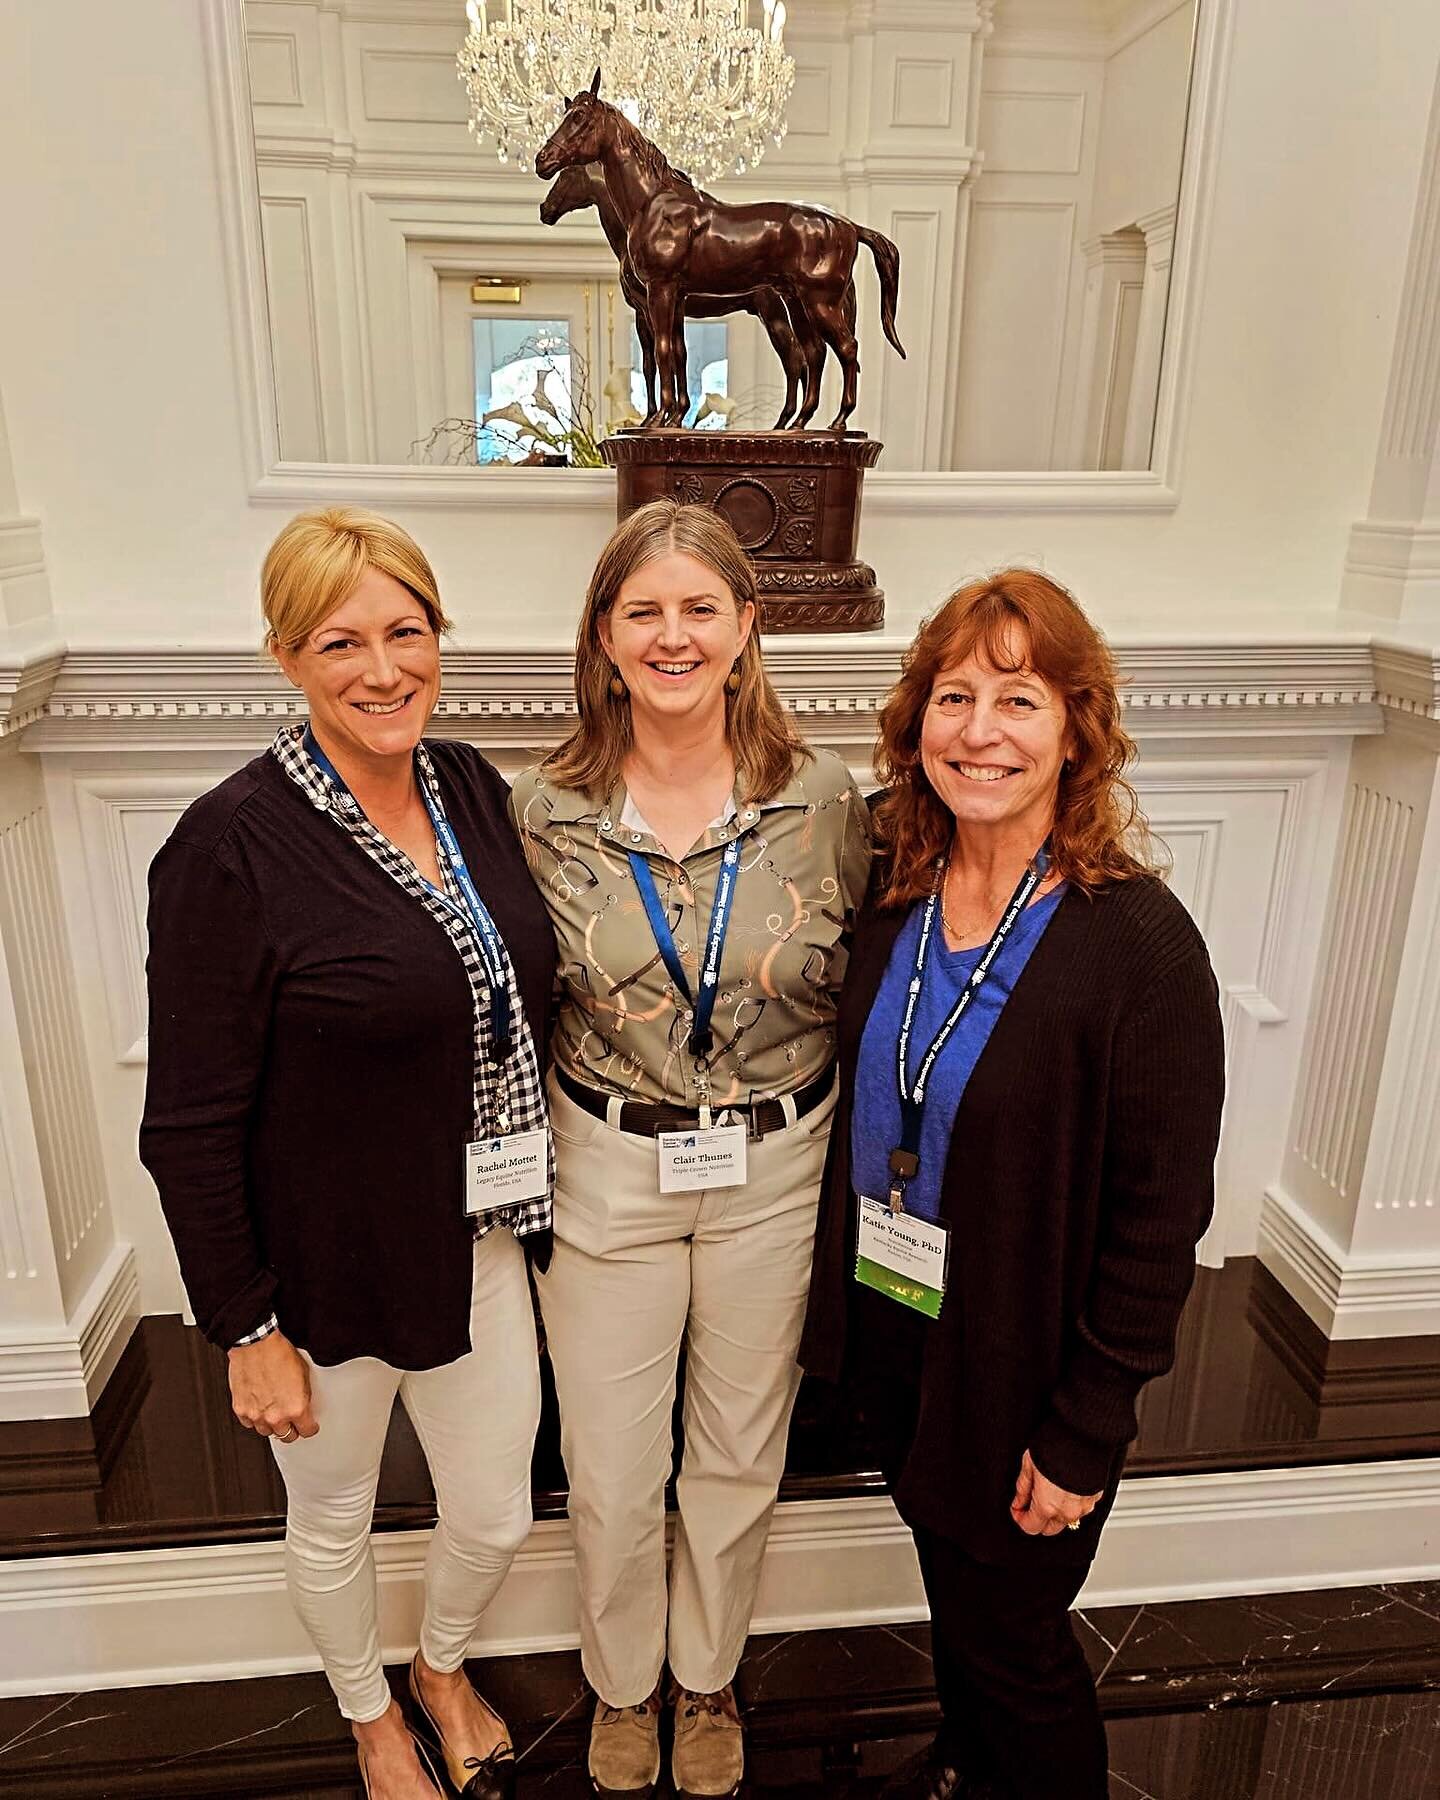 Three incredible women, mentors and role models for #equinenutrition professionals. 

Dr @rachelmottet  of @legacyequinenutrition, Dr @clairthunes of Clarity Equine Nutrition and her Scoop and Scale podcast, and Dr Katie Young of so many things equin